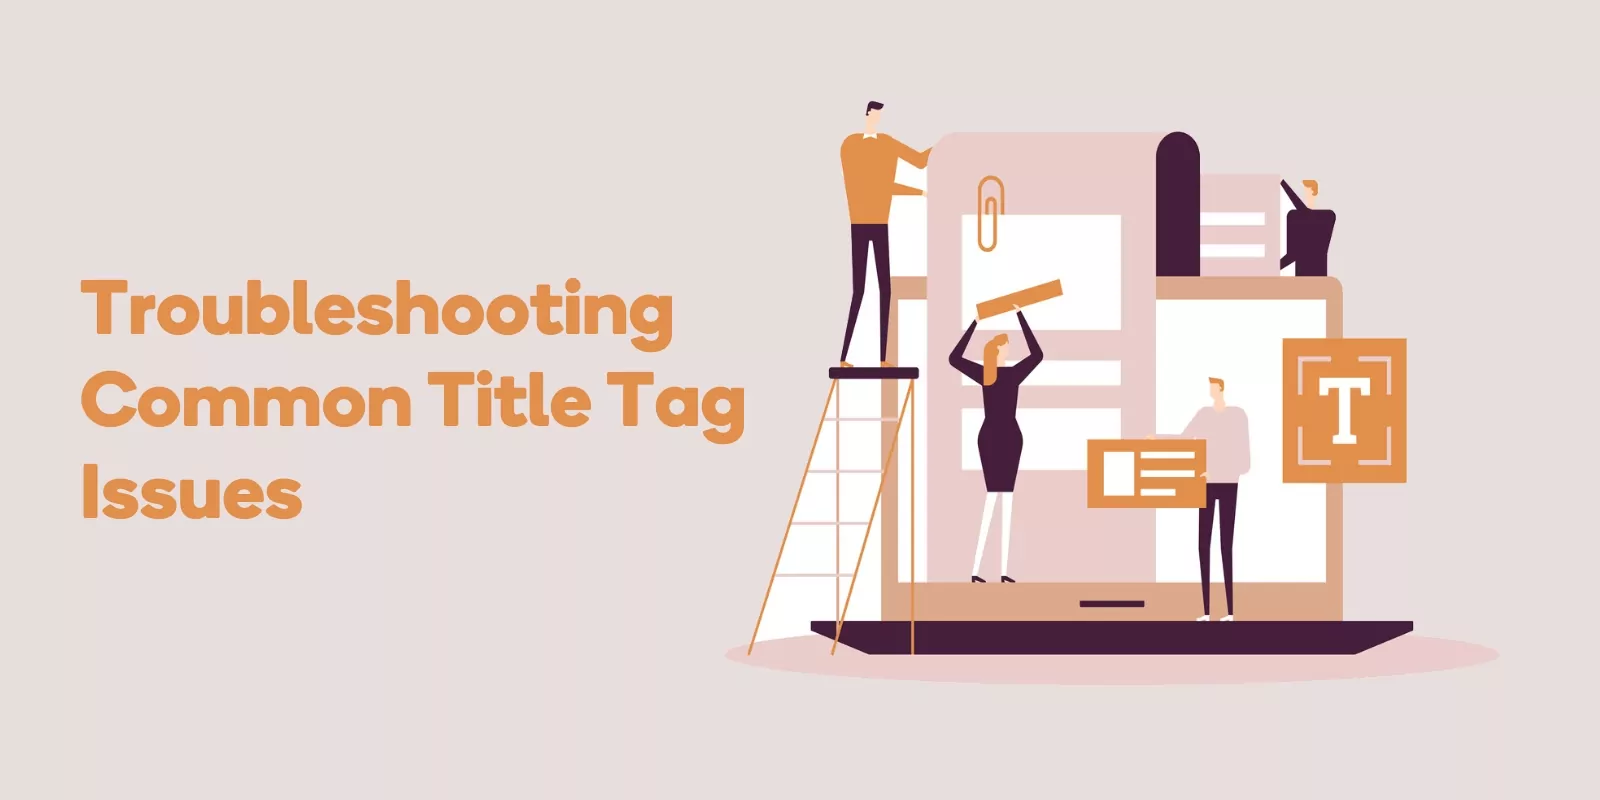 Troubleshooting Common Title Tag Issues